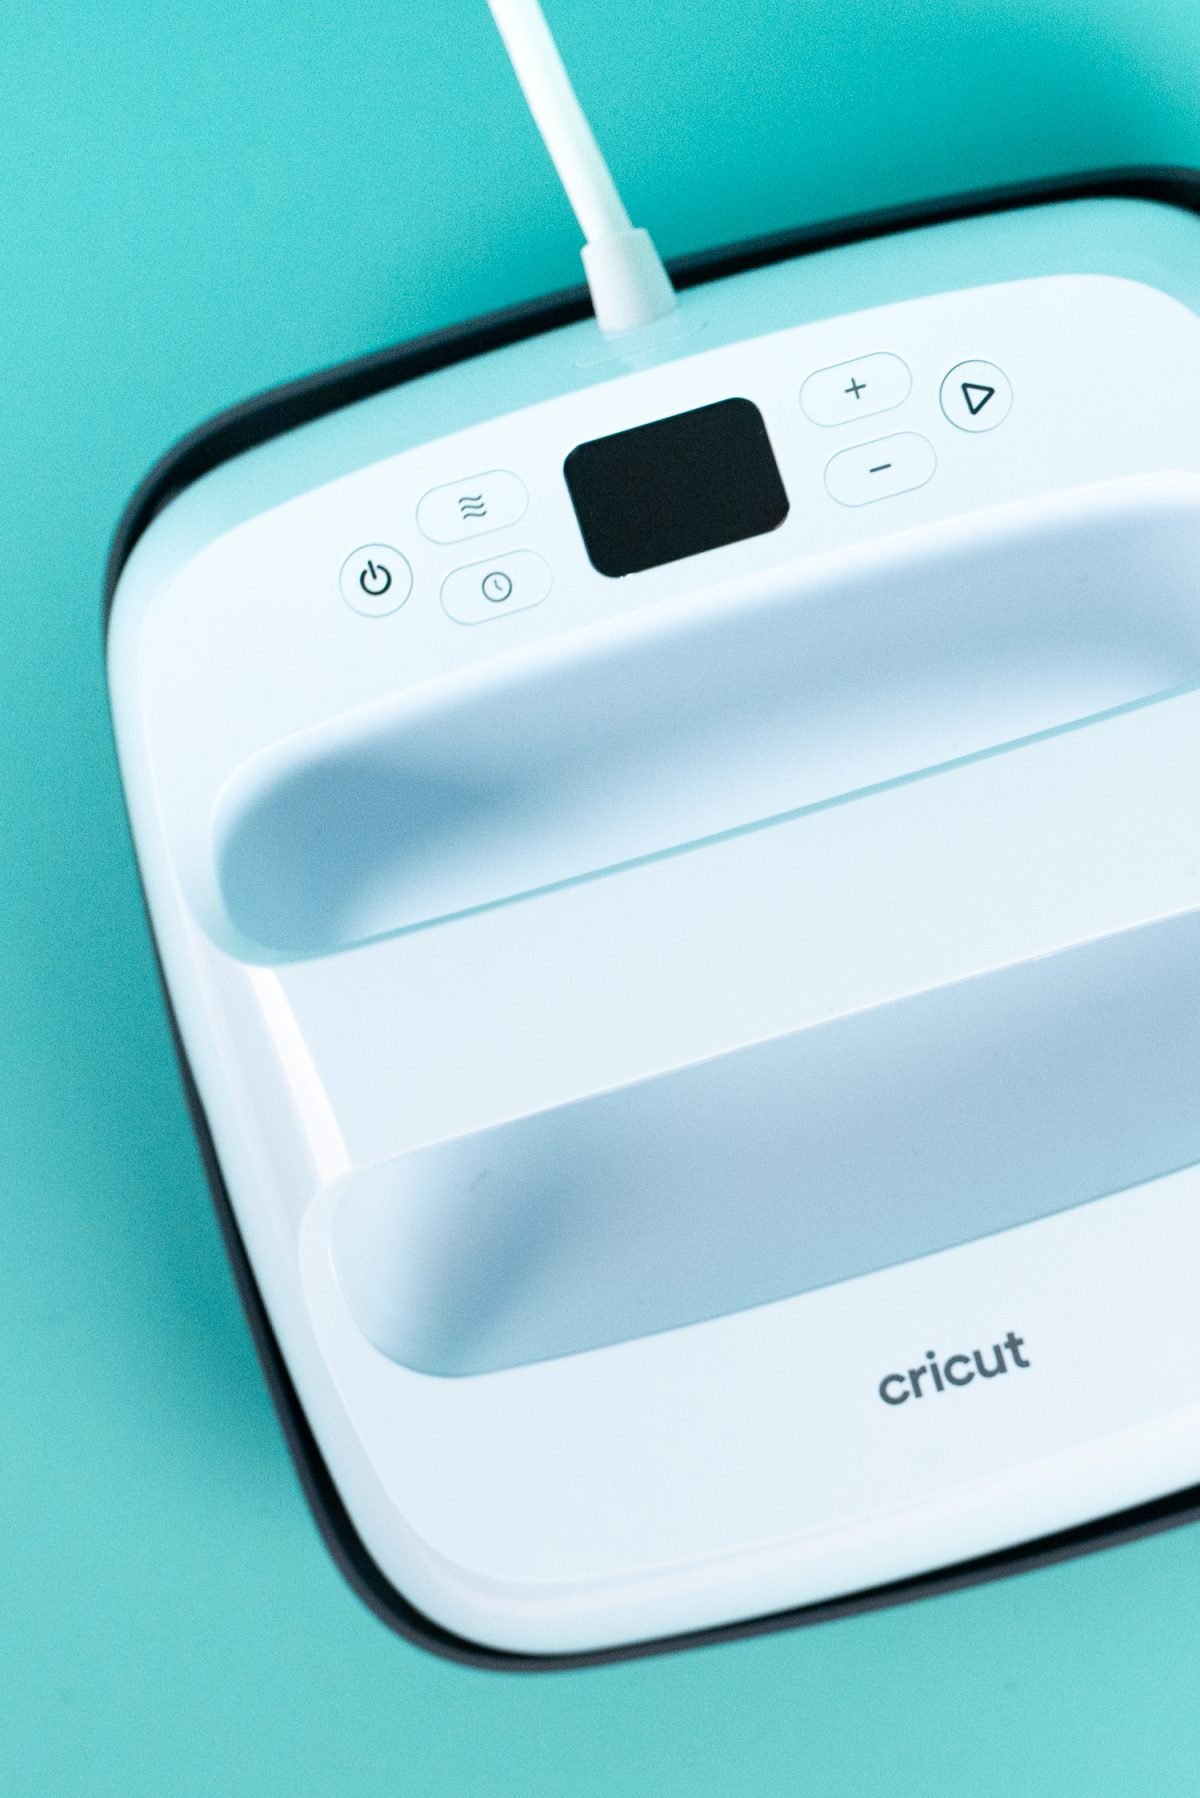 Cricut EasyPress 3 - How To Use It & More 